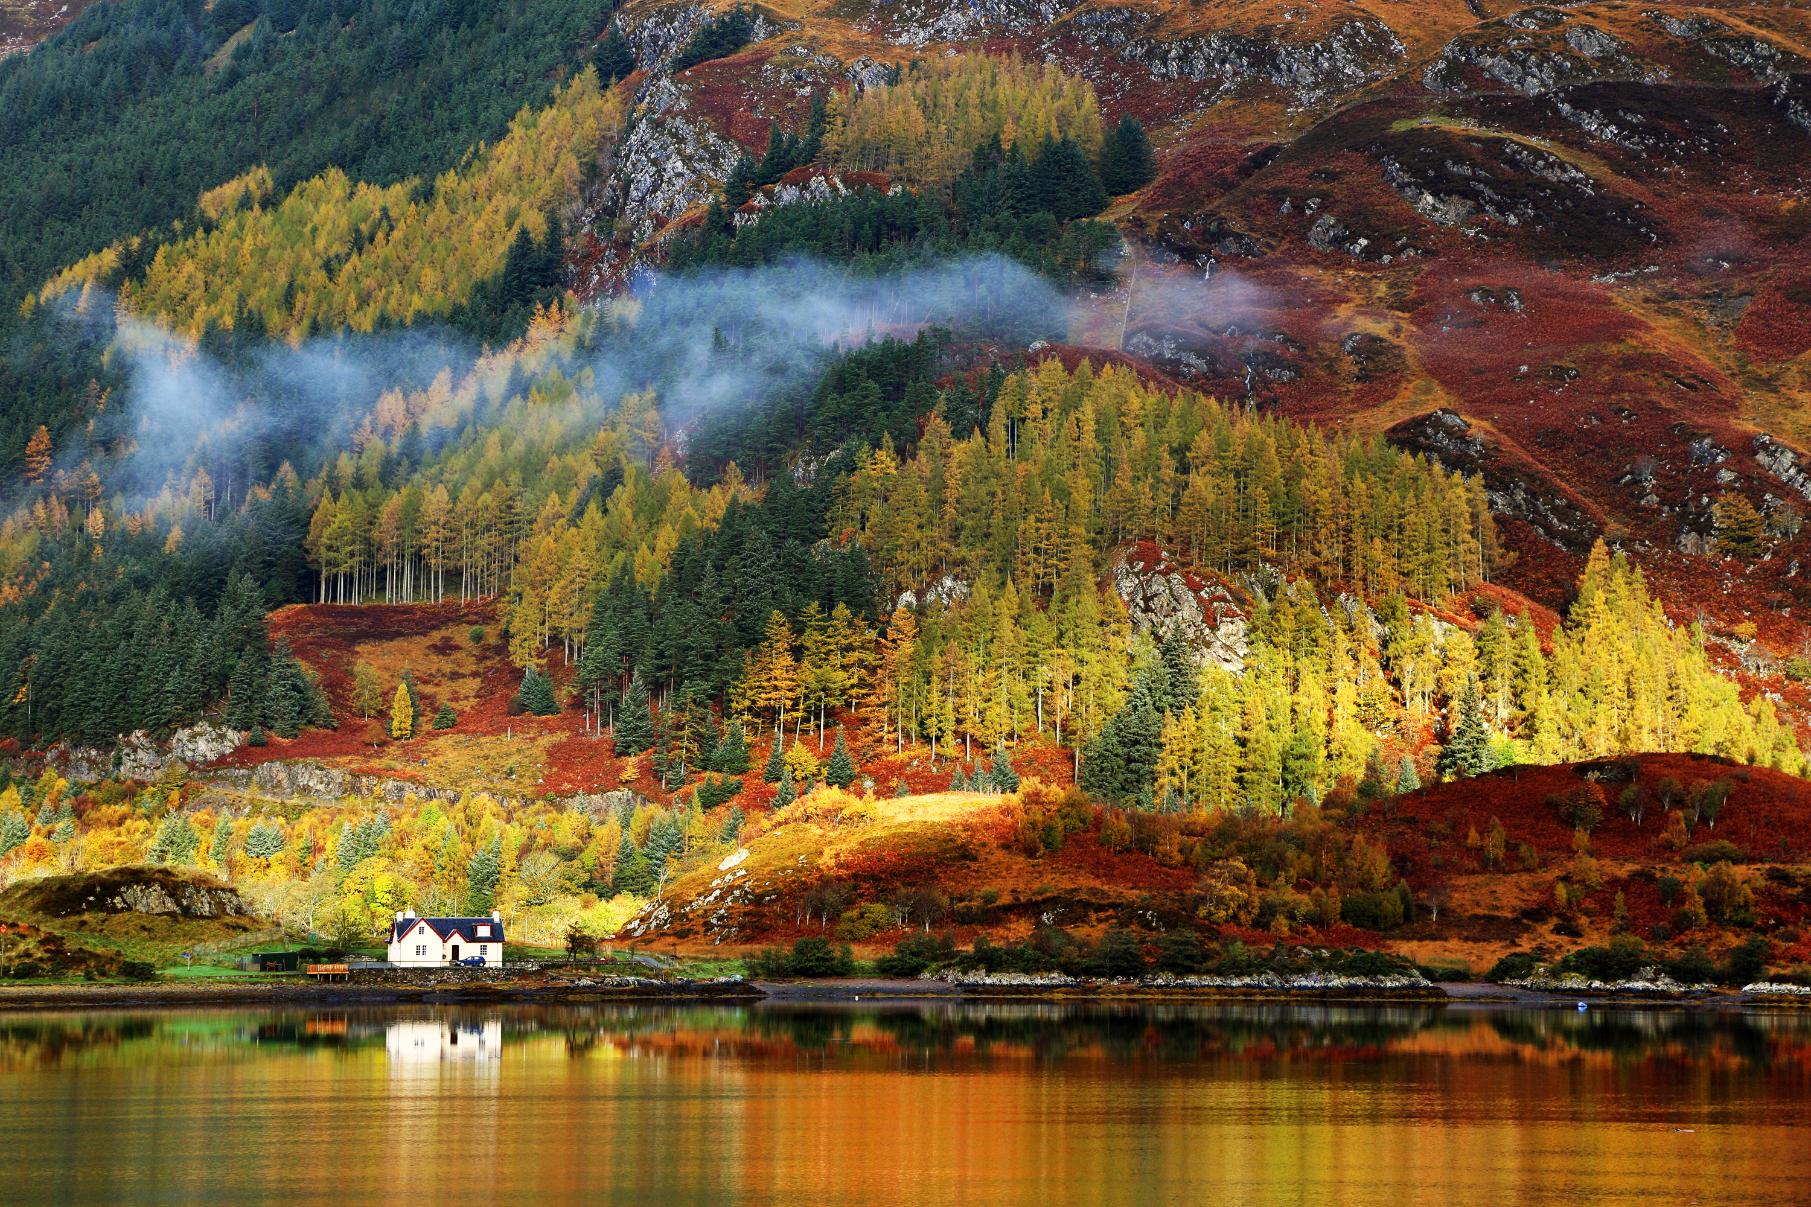 Autumn colours in the Scottish Highlands. Photo: Getty.